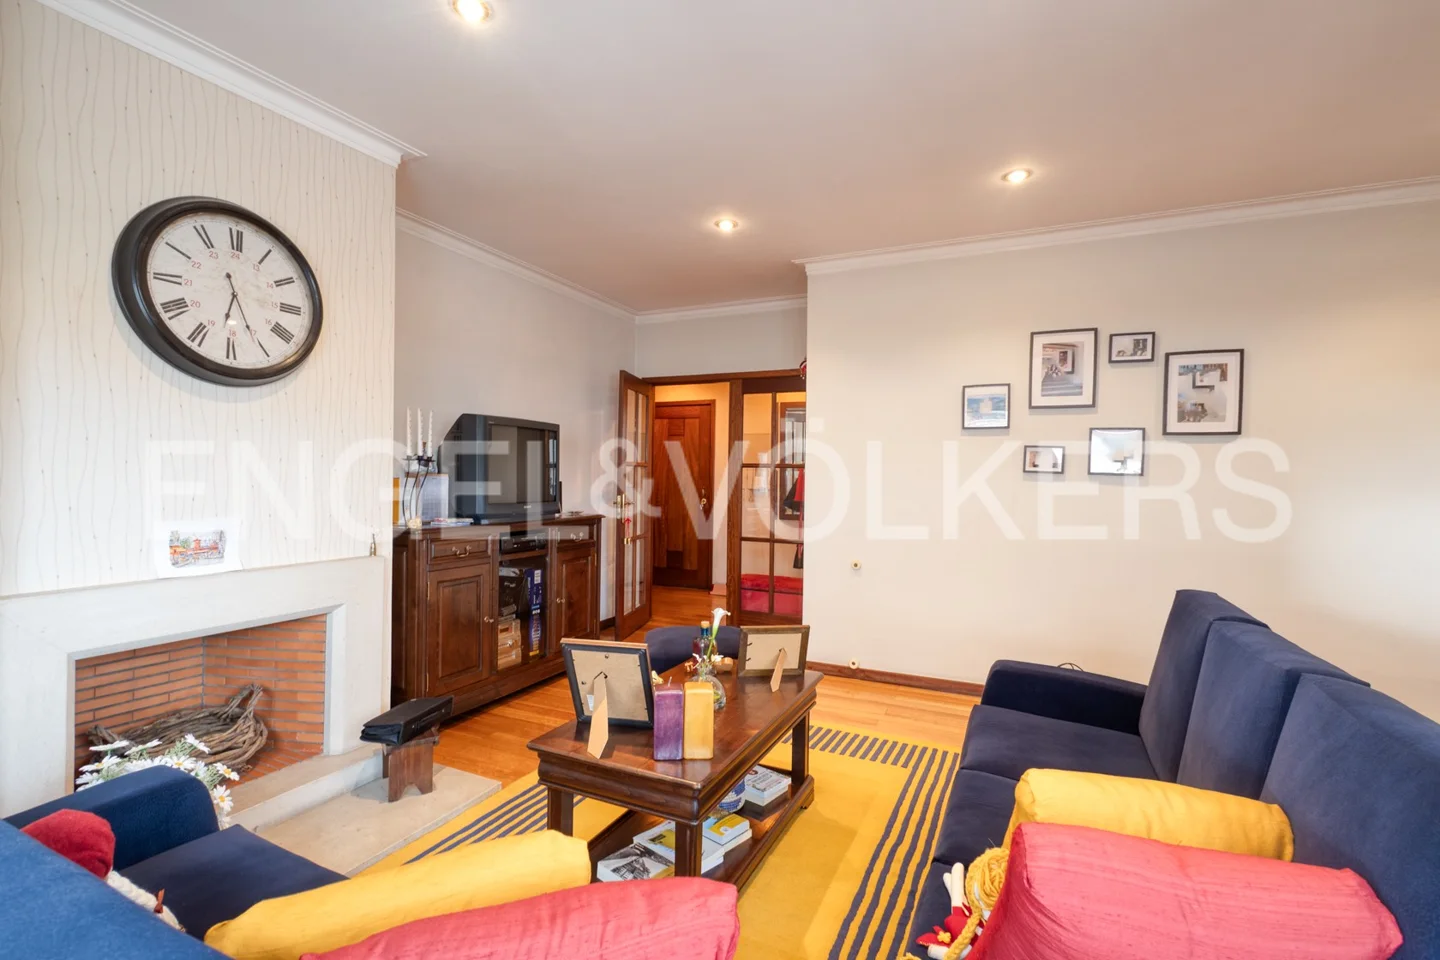 Three-Bedroom Apartment 5 min Walking Distance from the Historic Center